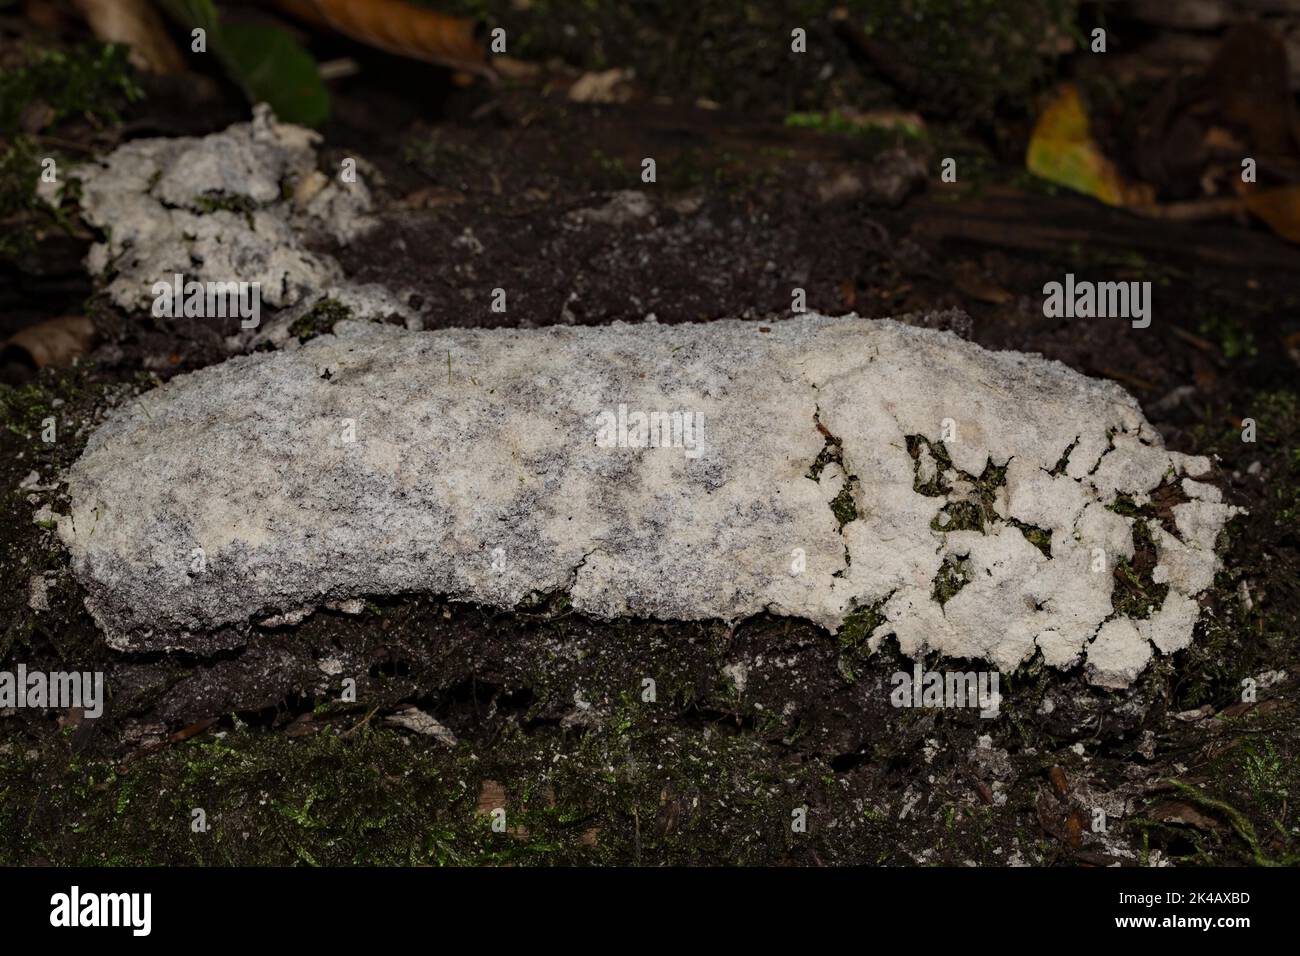 Villous slime mould cushion-shaped elongated grey-brownish fruiting body on tree trunk Stock Photo